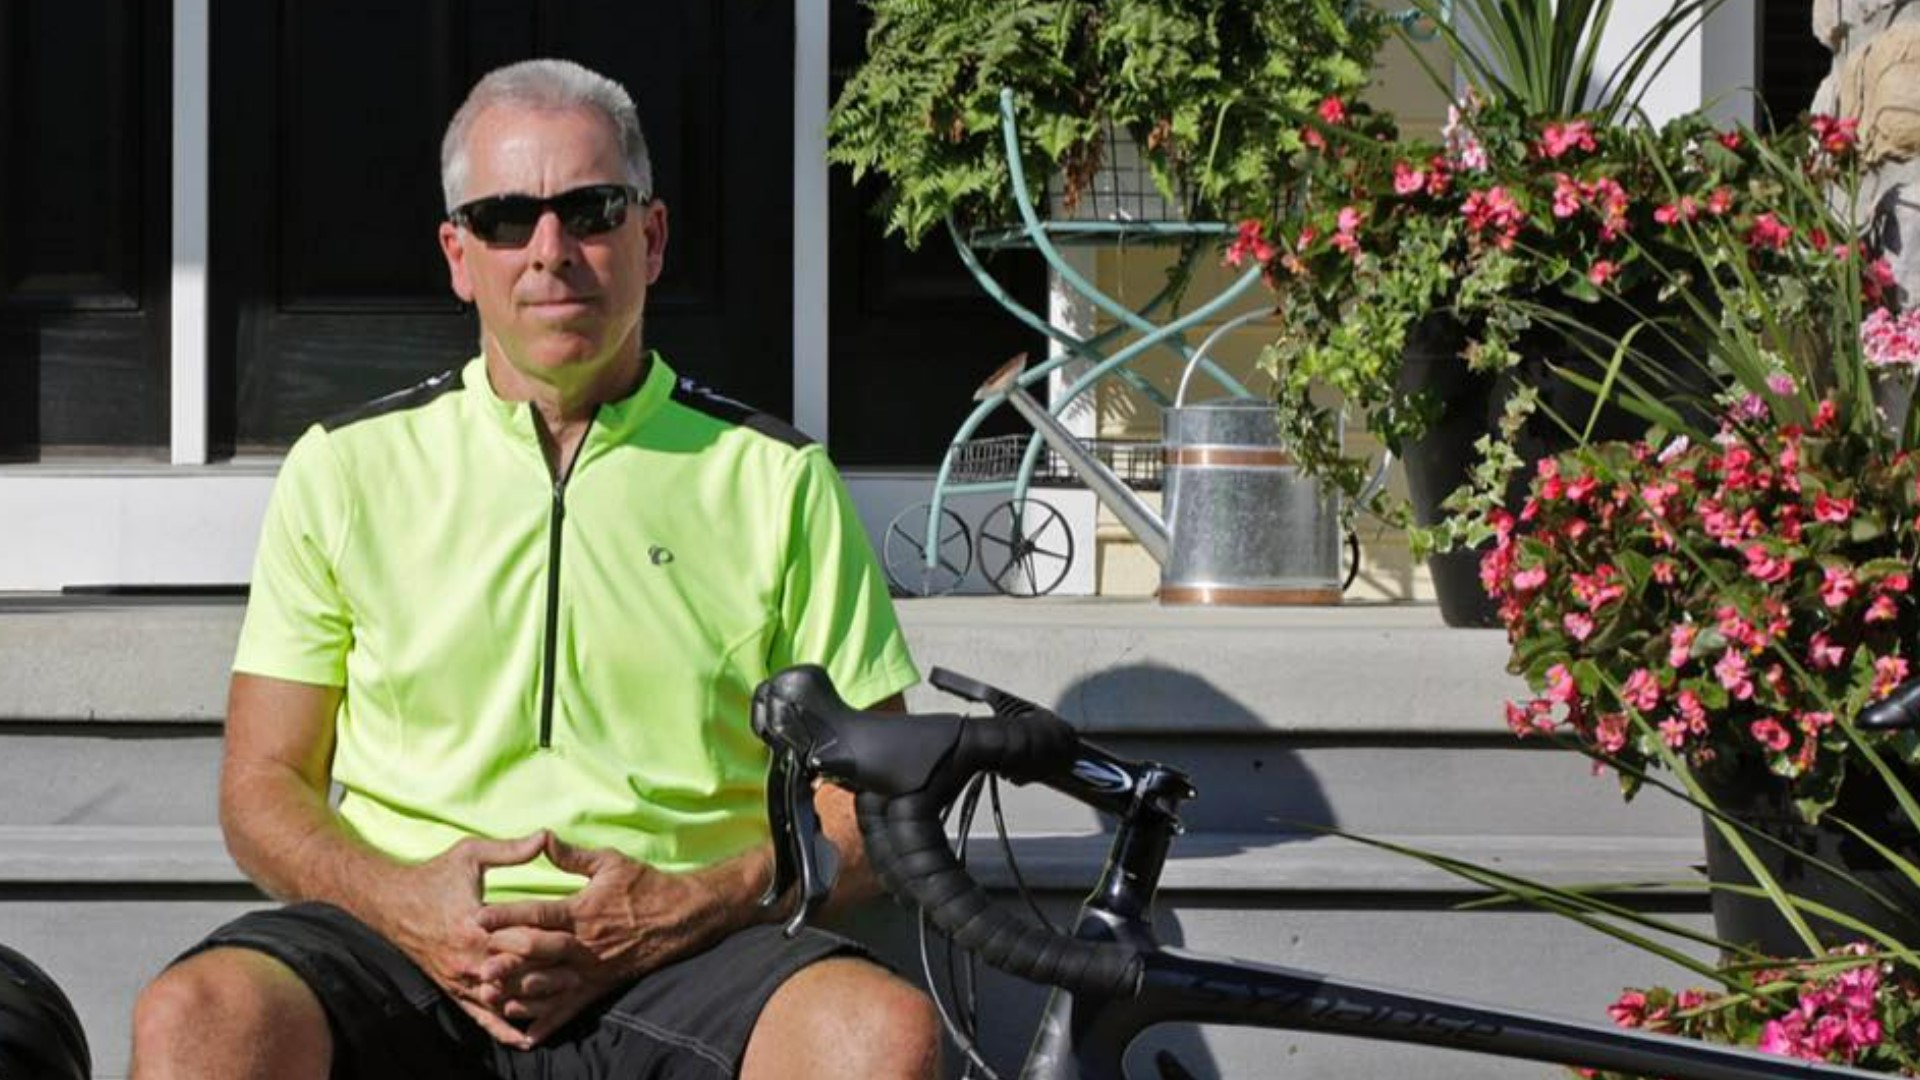 Scott Riden is now in a different kind of race, one that's taking him across the U.S. for Parkinson's research. Monday, he's stopping in Columbus.